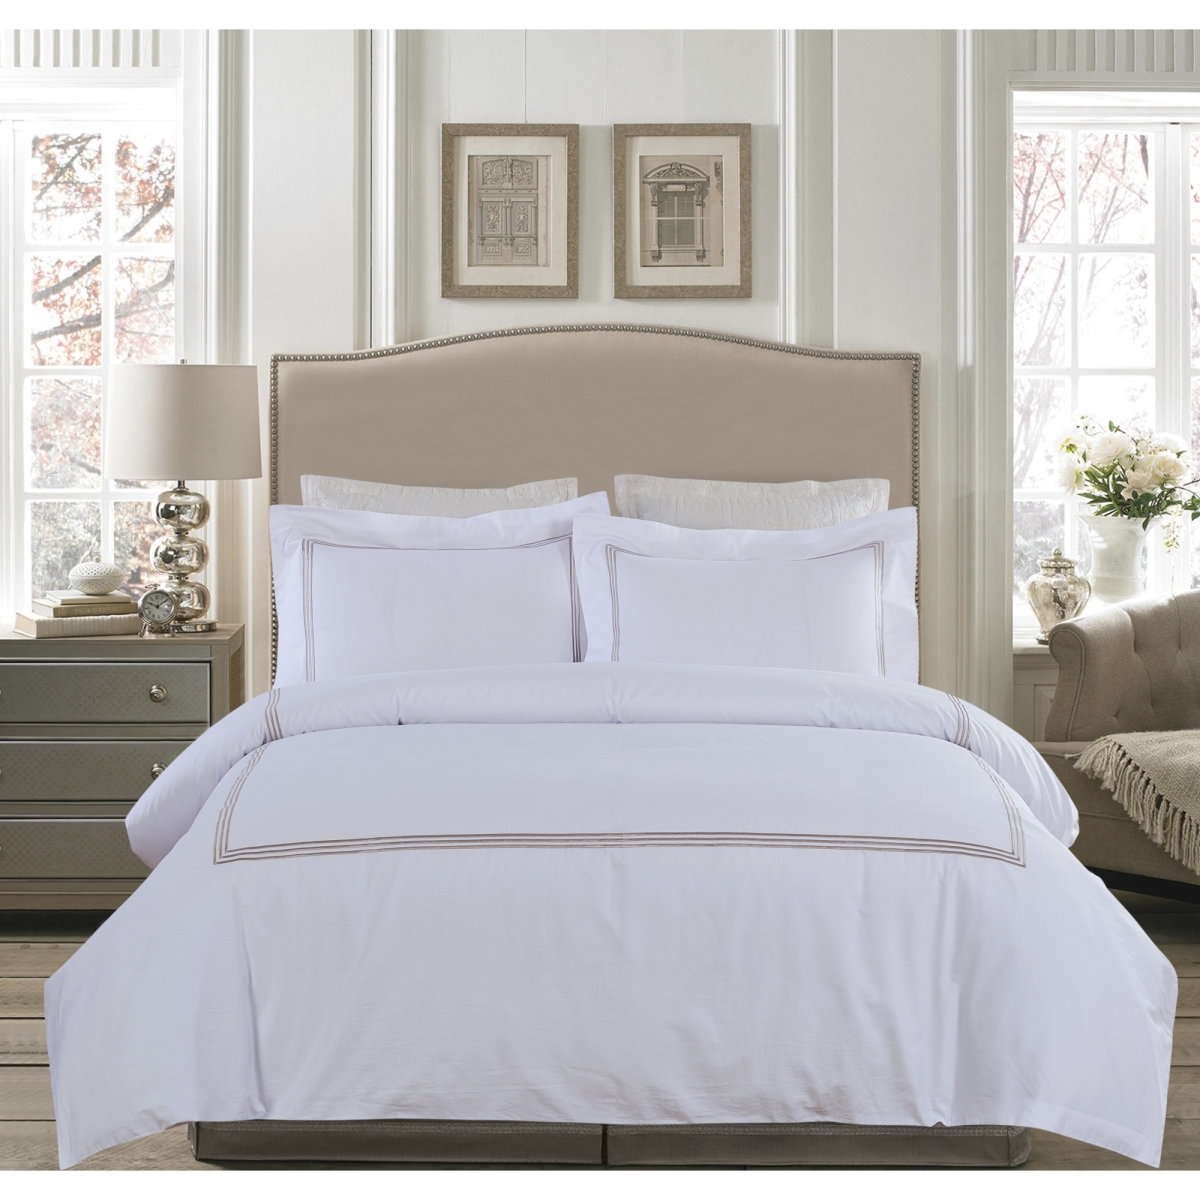 Whtx606-tnq Tan Line Embroidery On White 300 Thread Count Cotton Sateen Duvet Set - Queen Size - 3 Piece